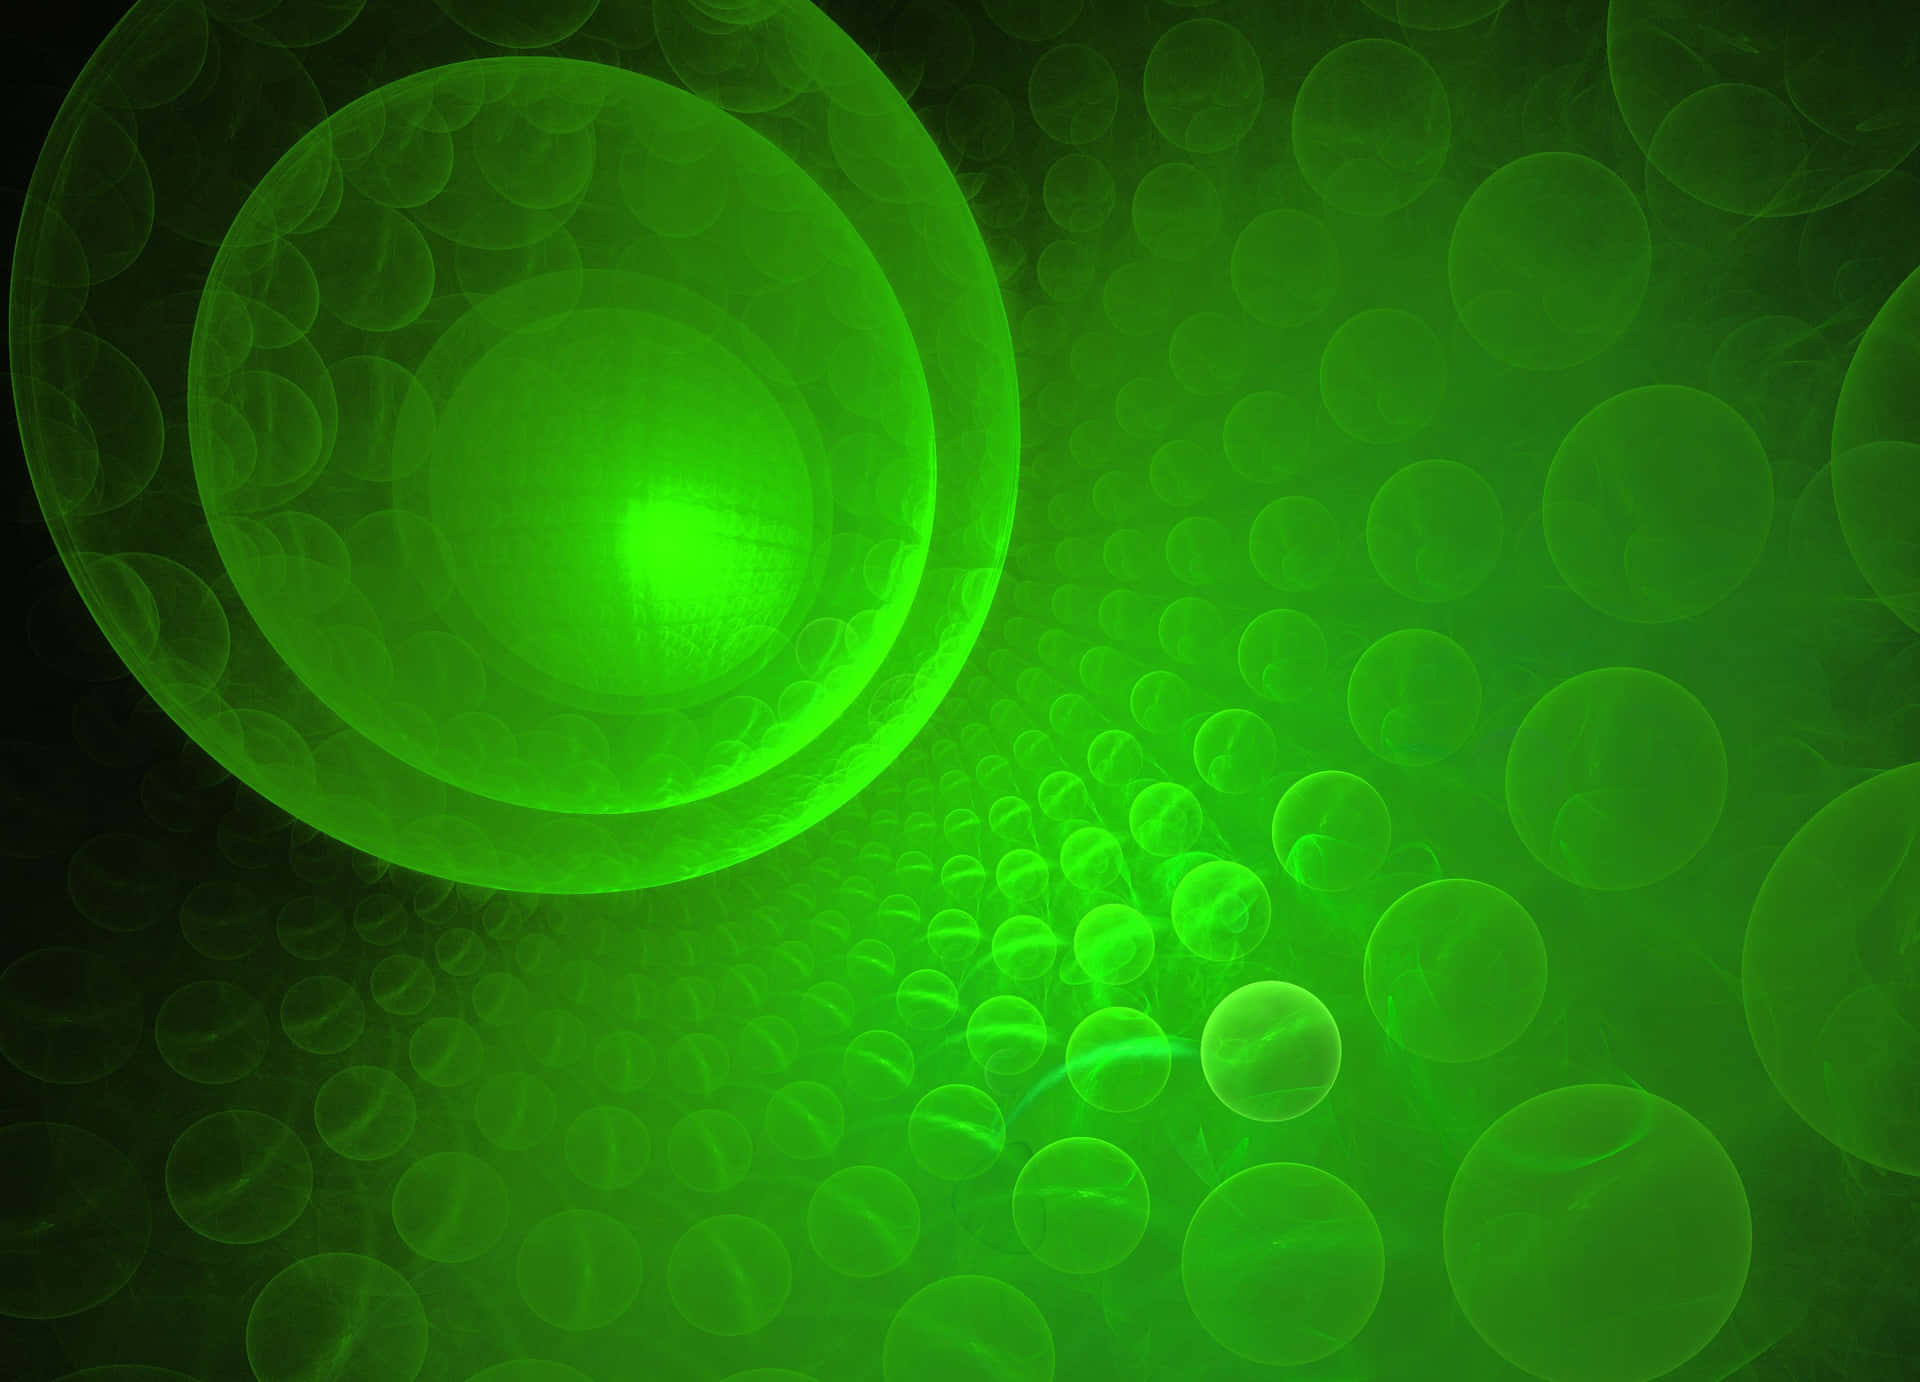 Abstract Green Background Wallpaper Vector Graphic Vector Download